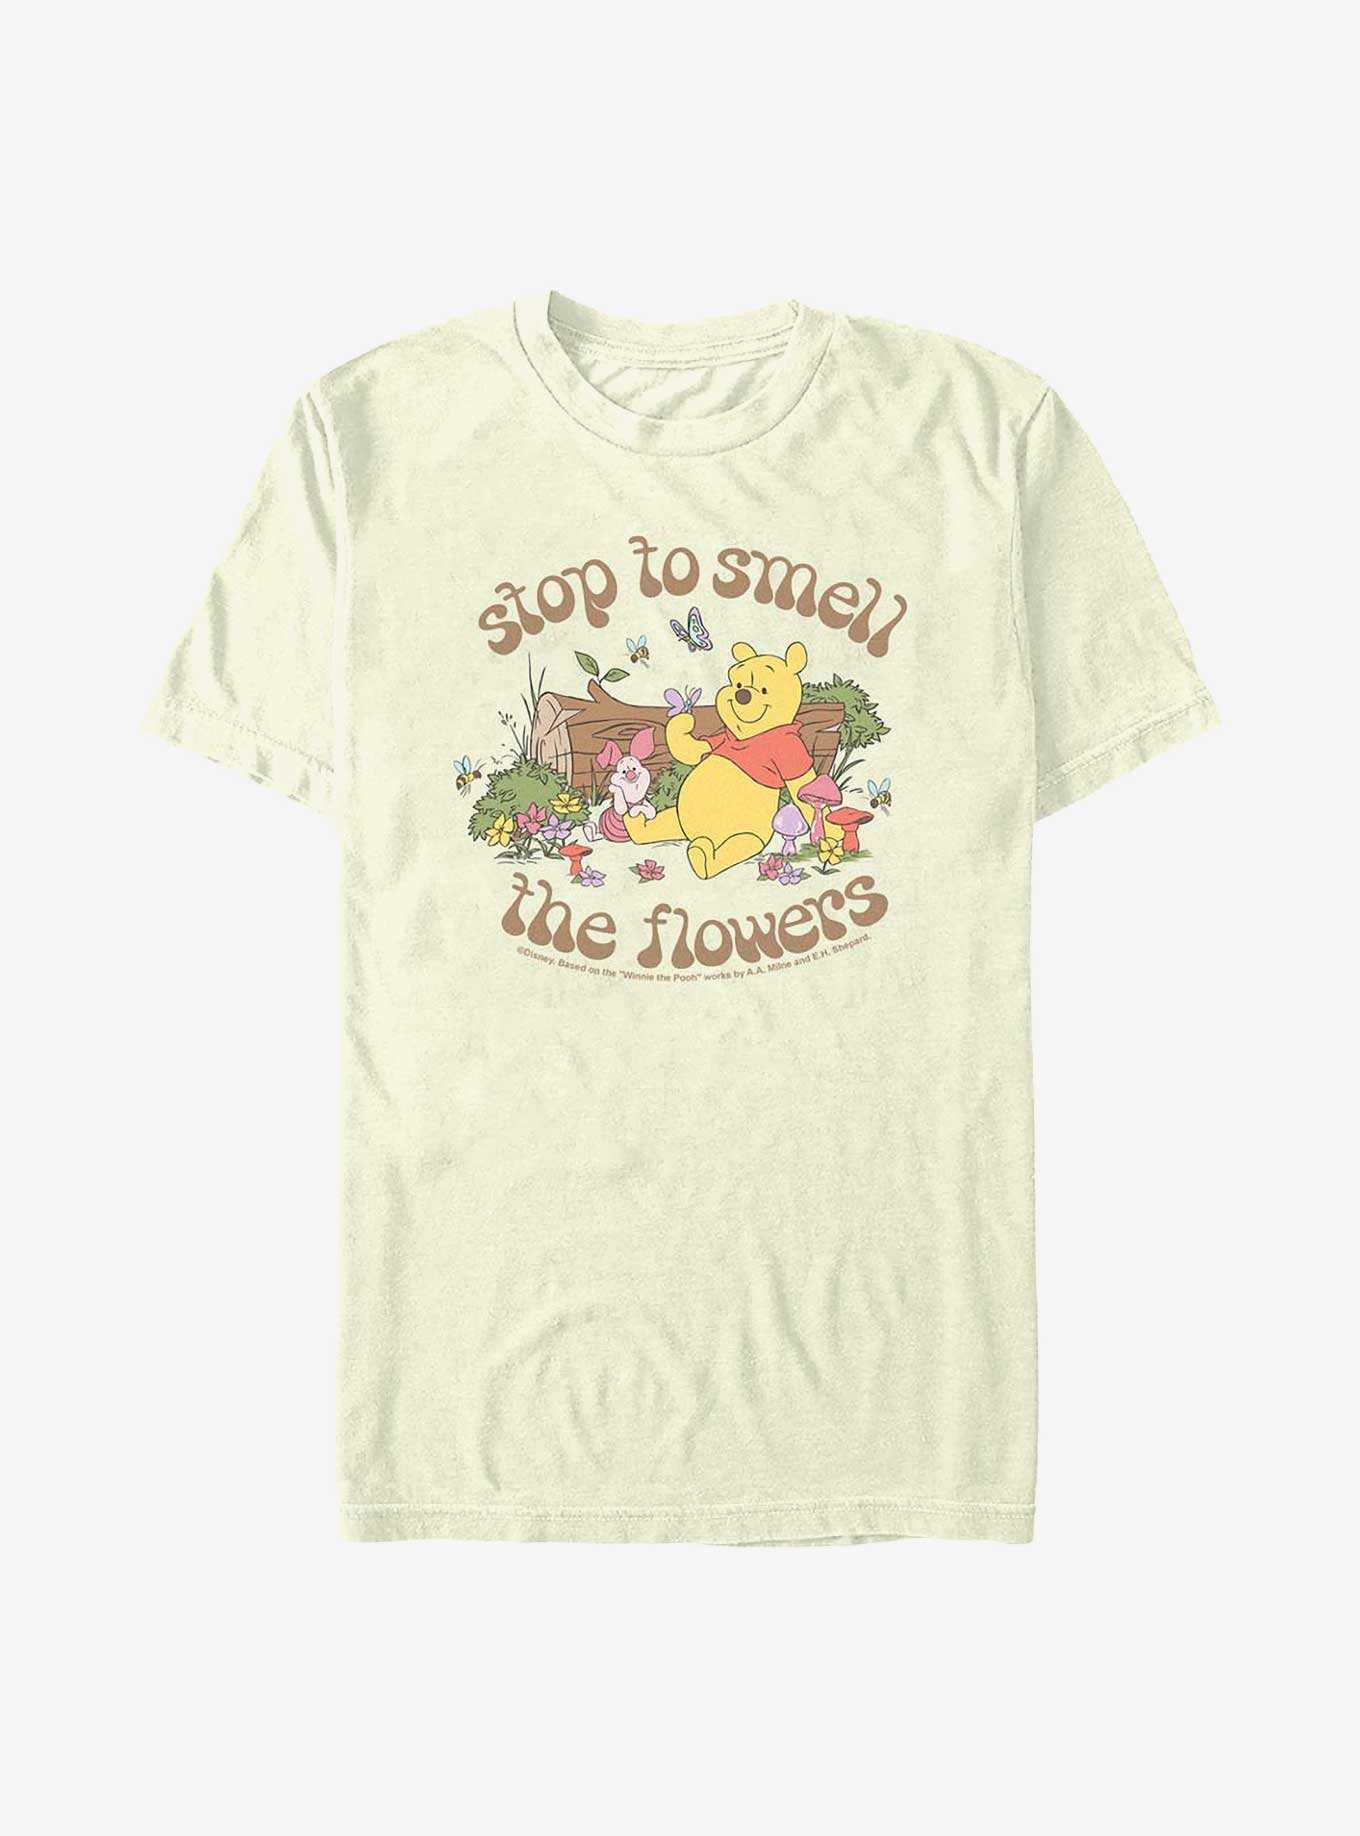 Disney Winnie The Pooh Smell The Flowers T-Shirt, , hi-res